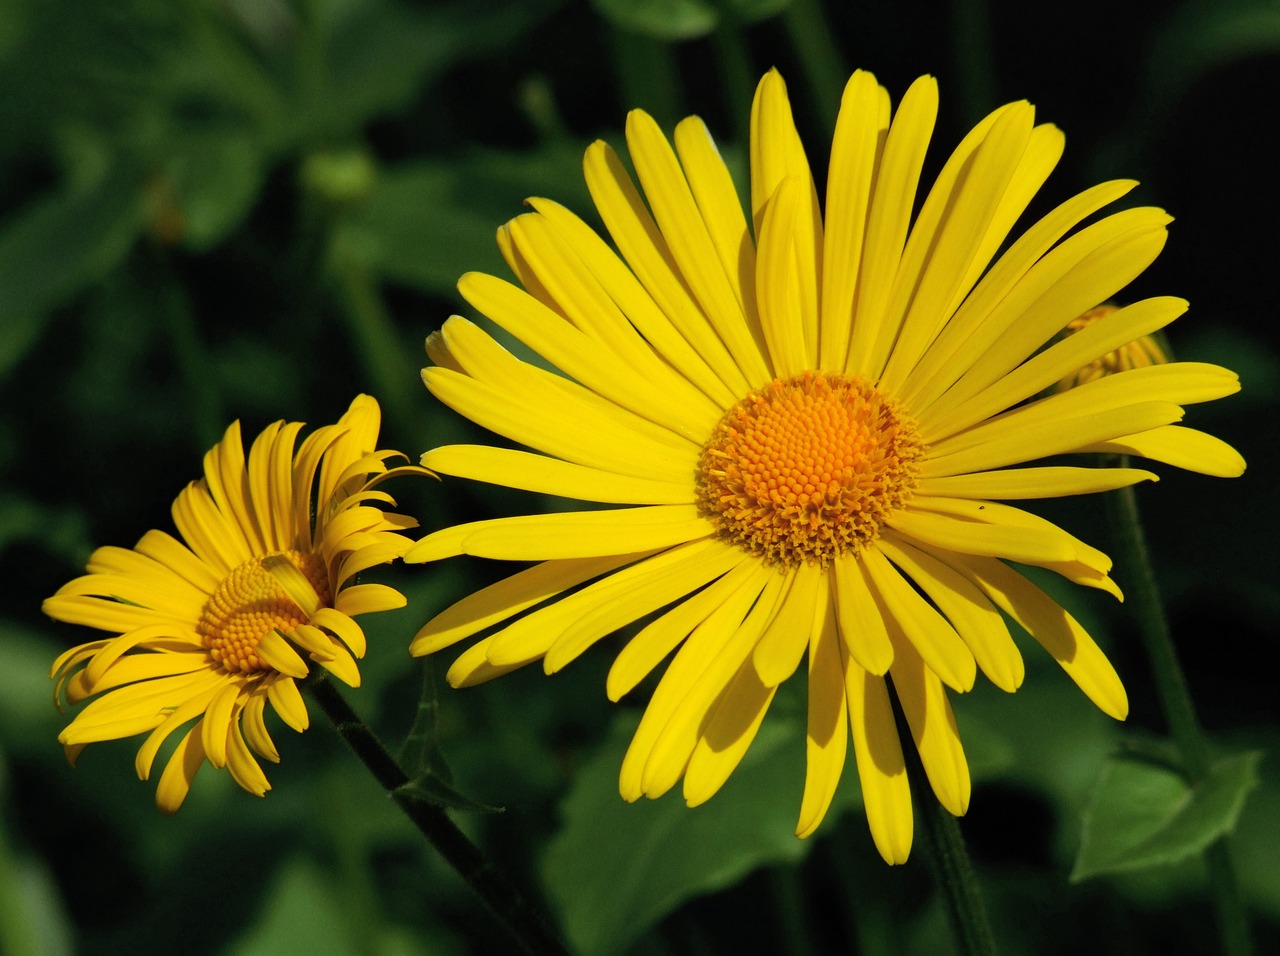 a couple of yellow flowers sitting next to each other, by Dietmar Damerau, flickr, giant daisy flower over head, flowers and stems, herb, full sun